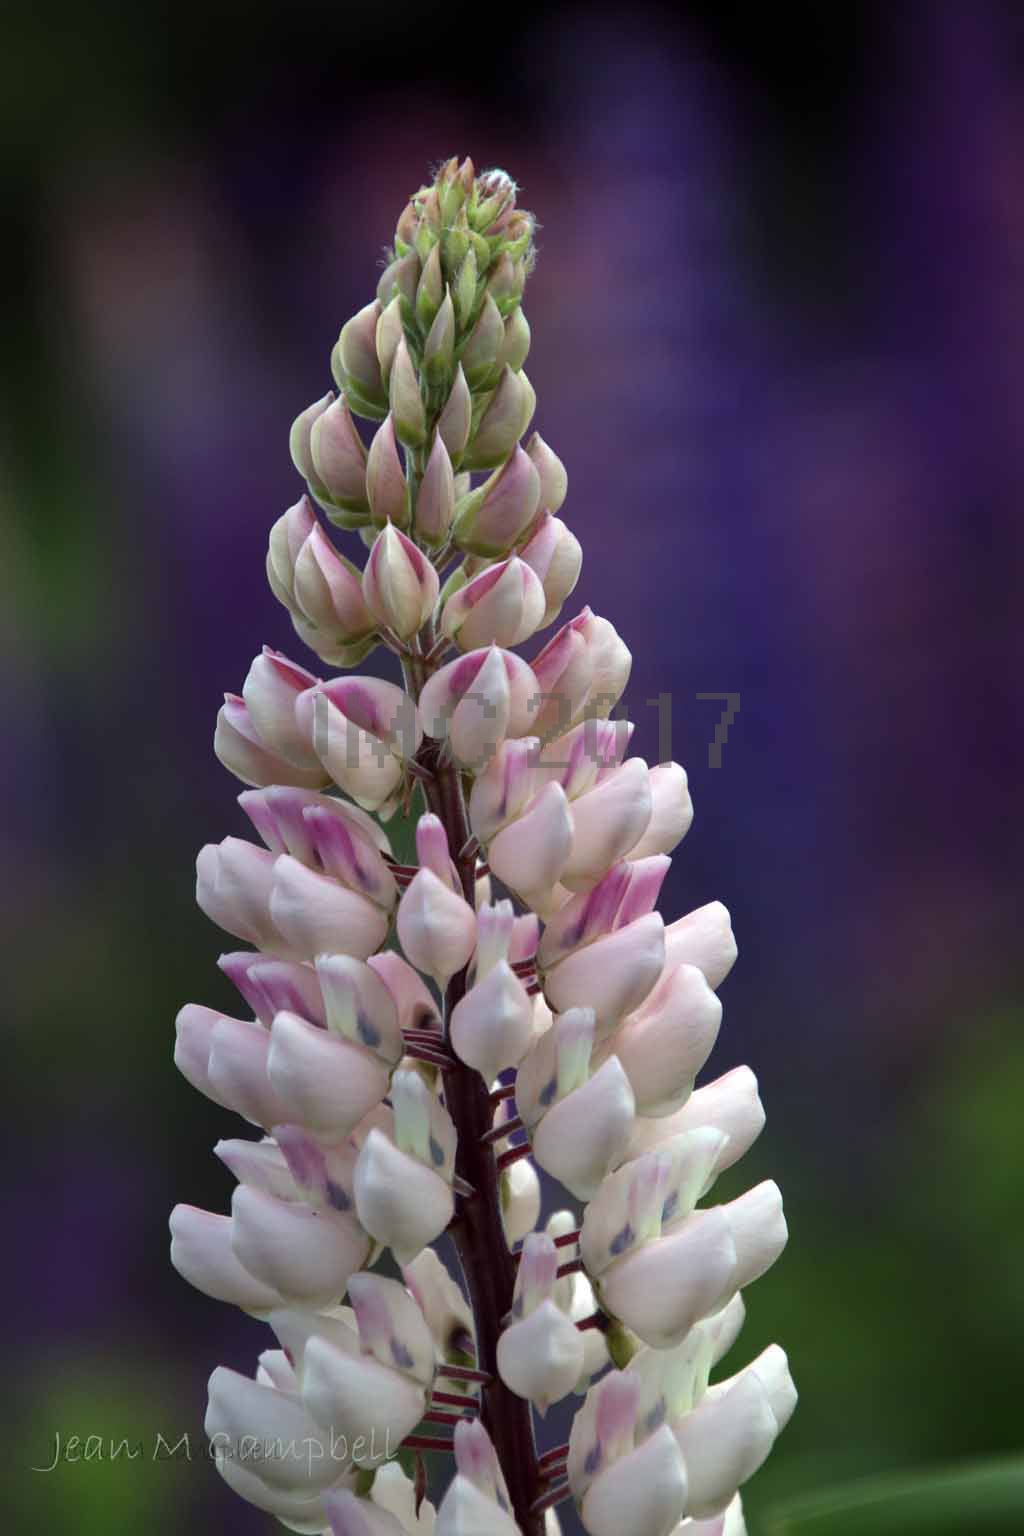 Lupine in bloom in late June